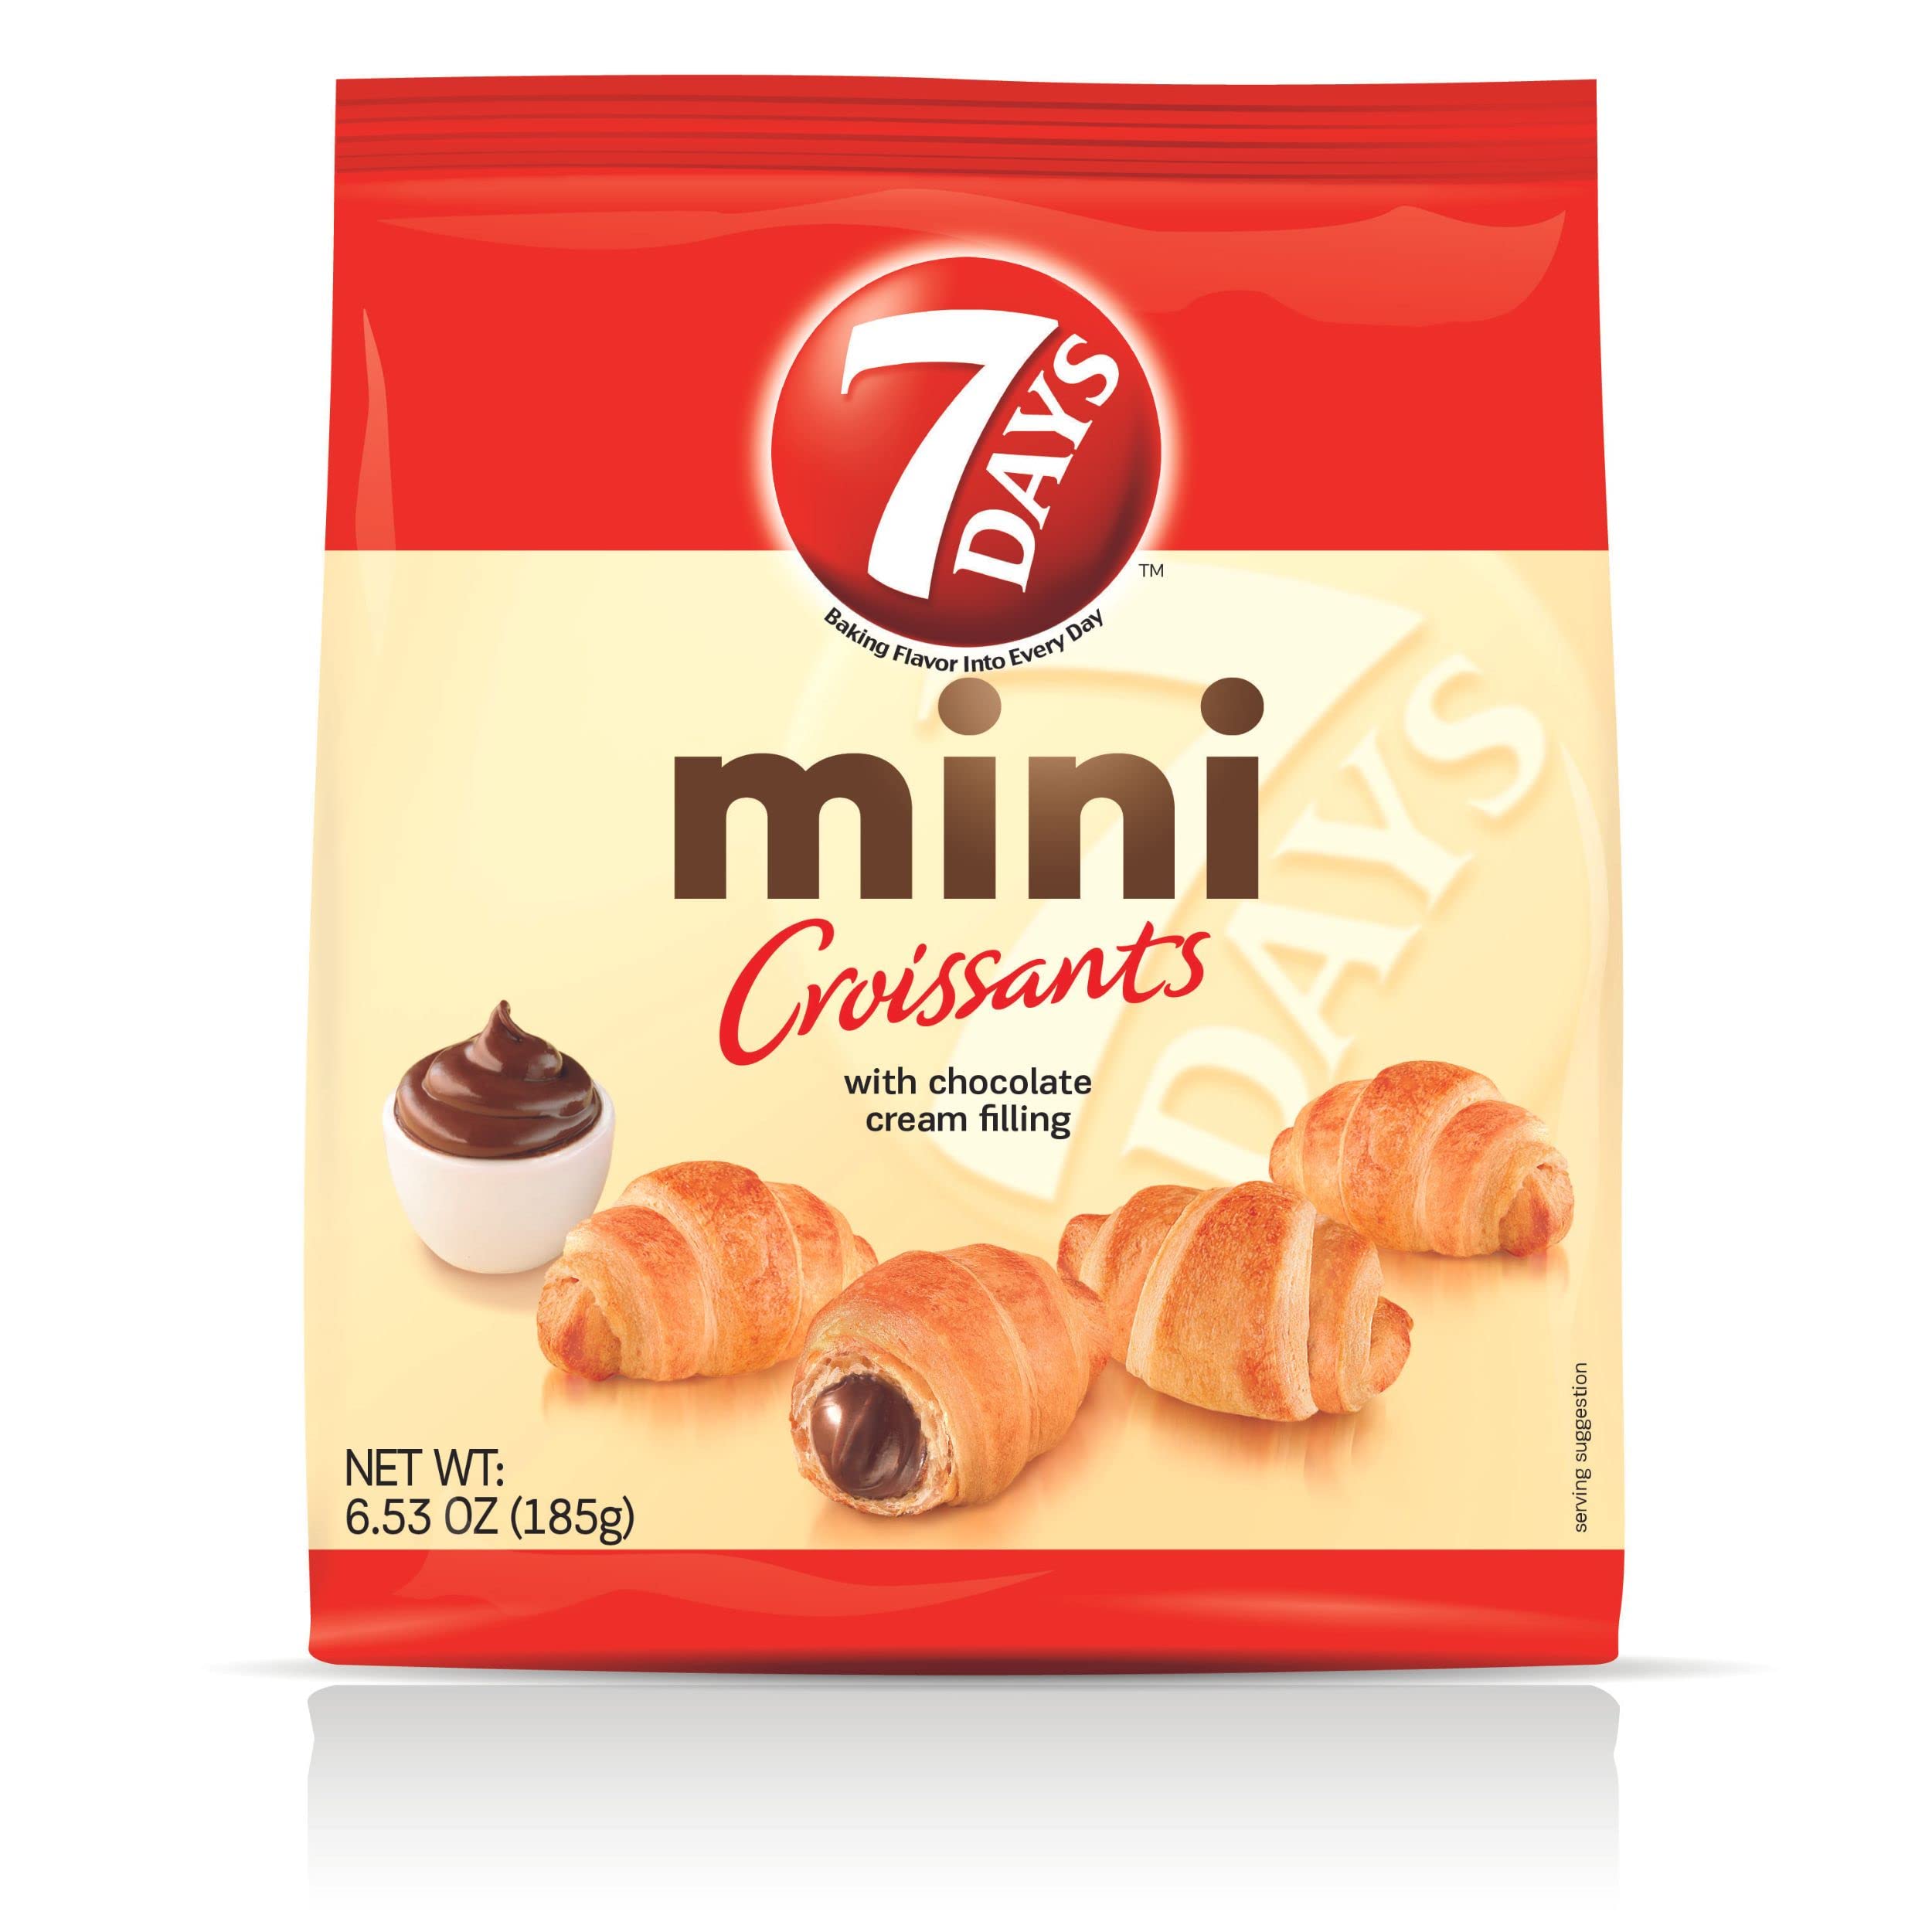 is 7 days mini croissant halal in the United States?